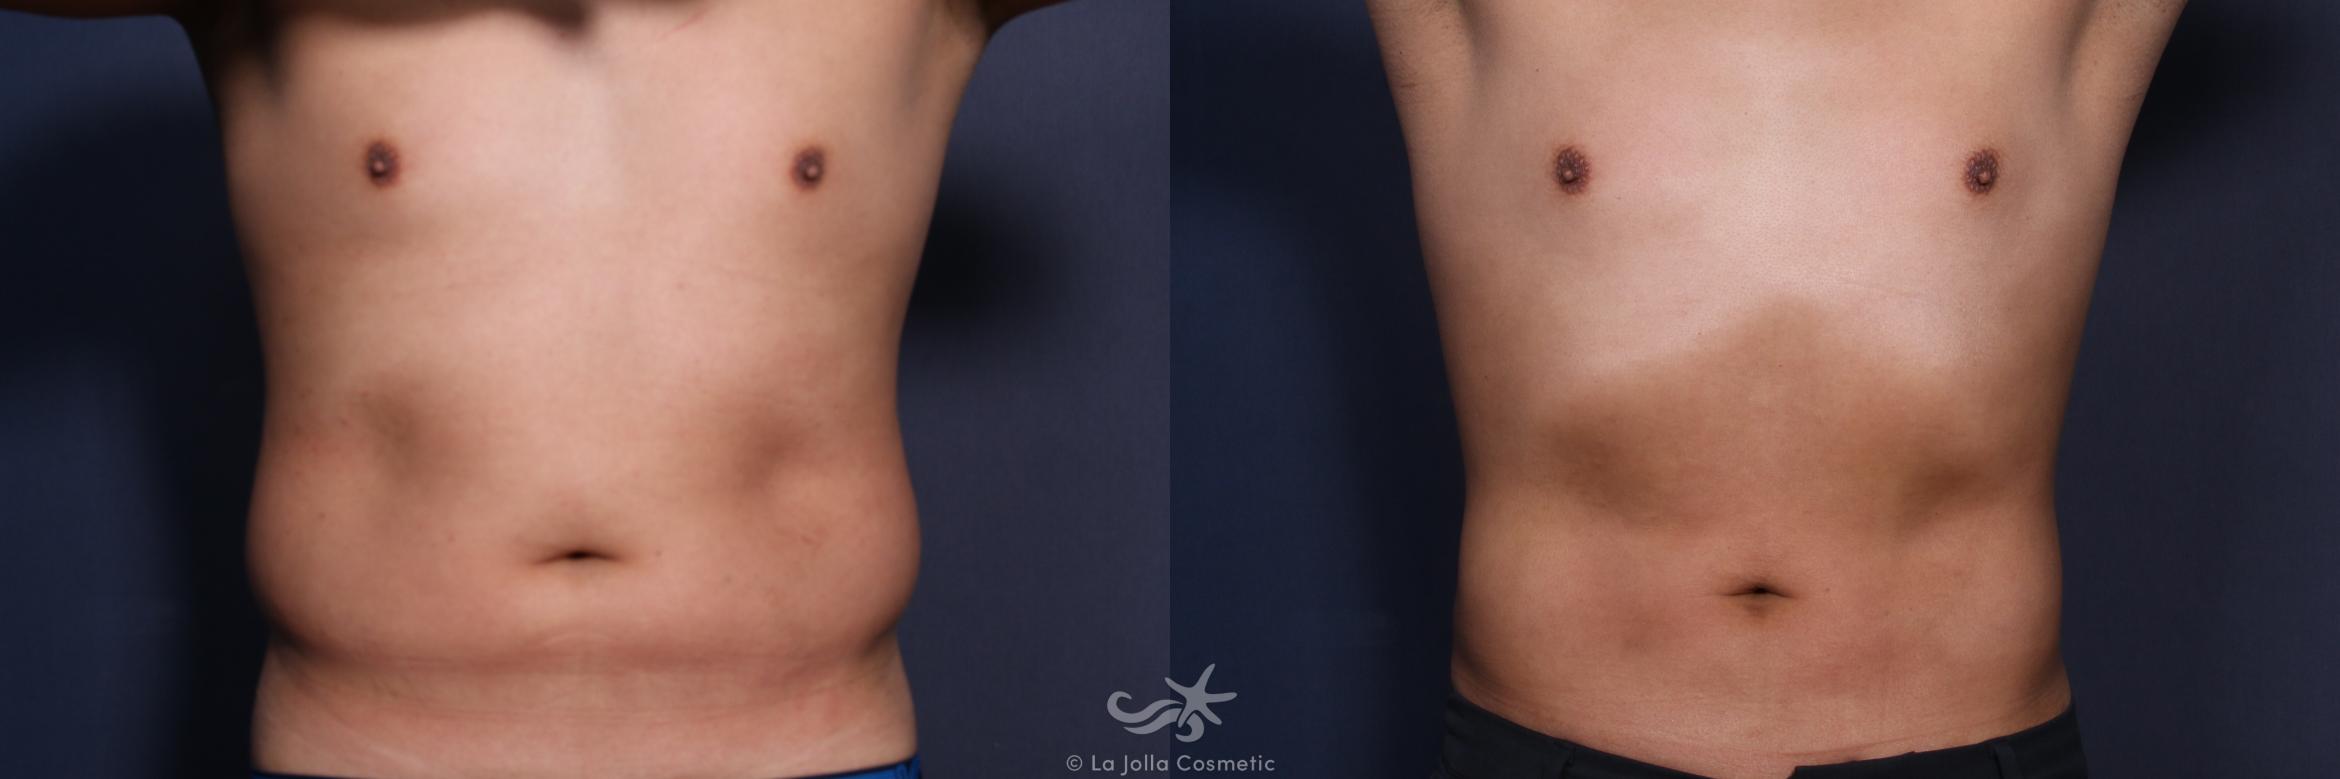 Before & After Male Liposuction Result 147 Front View in San Diego, CA